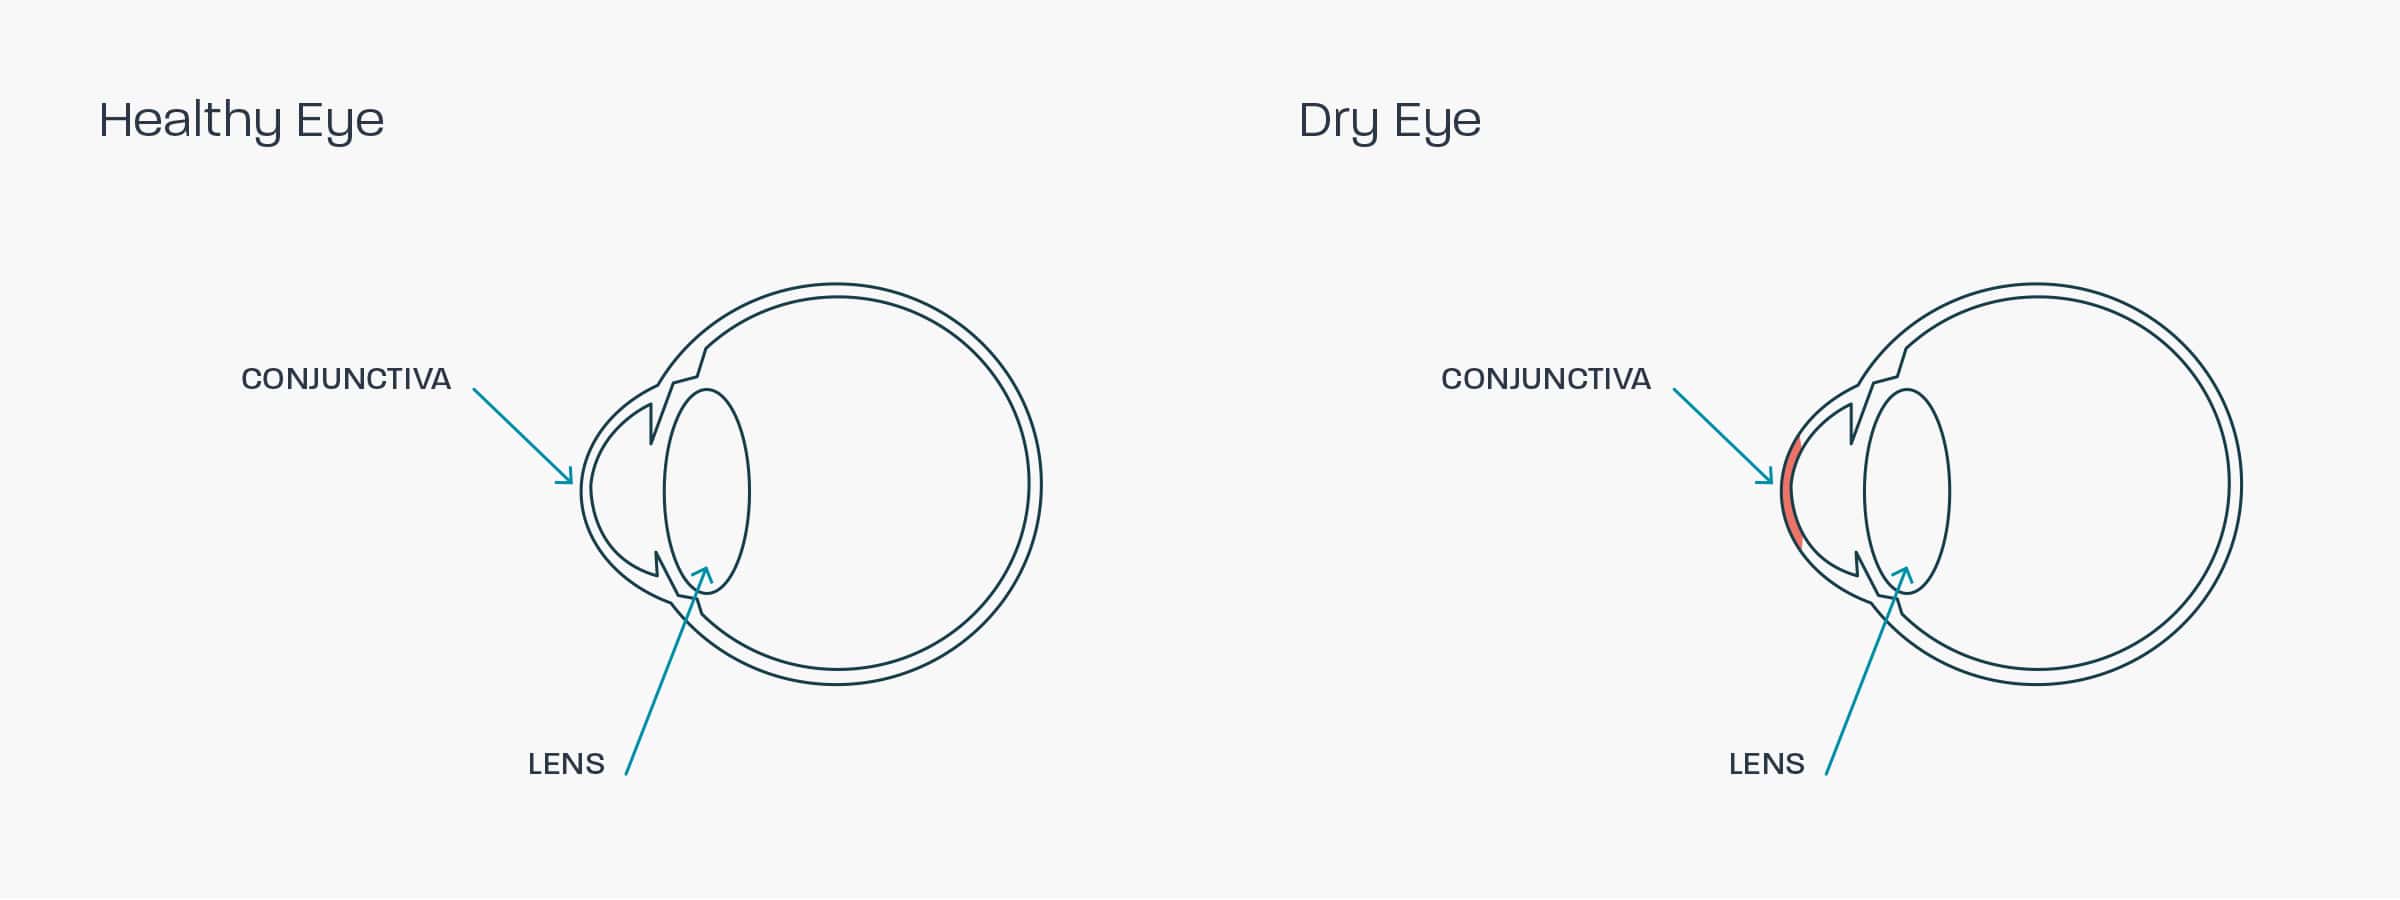 A graphic showing how dry eye syndrome affects the eye